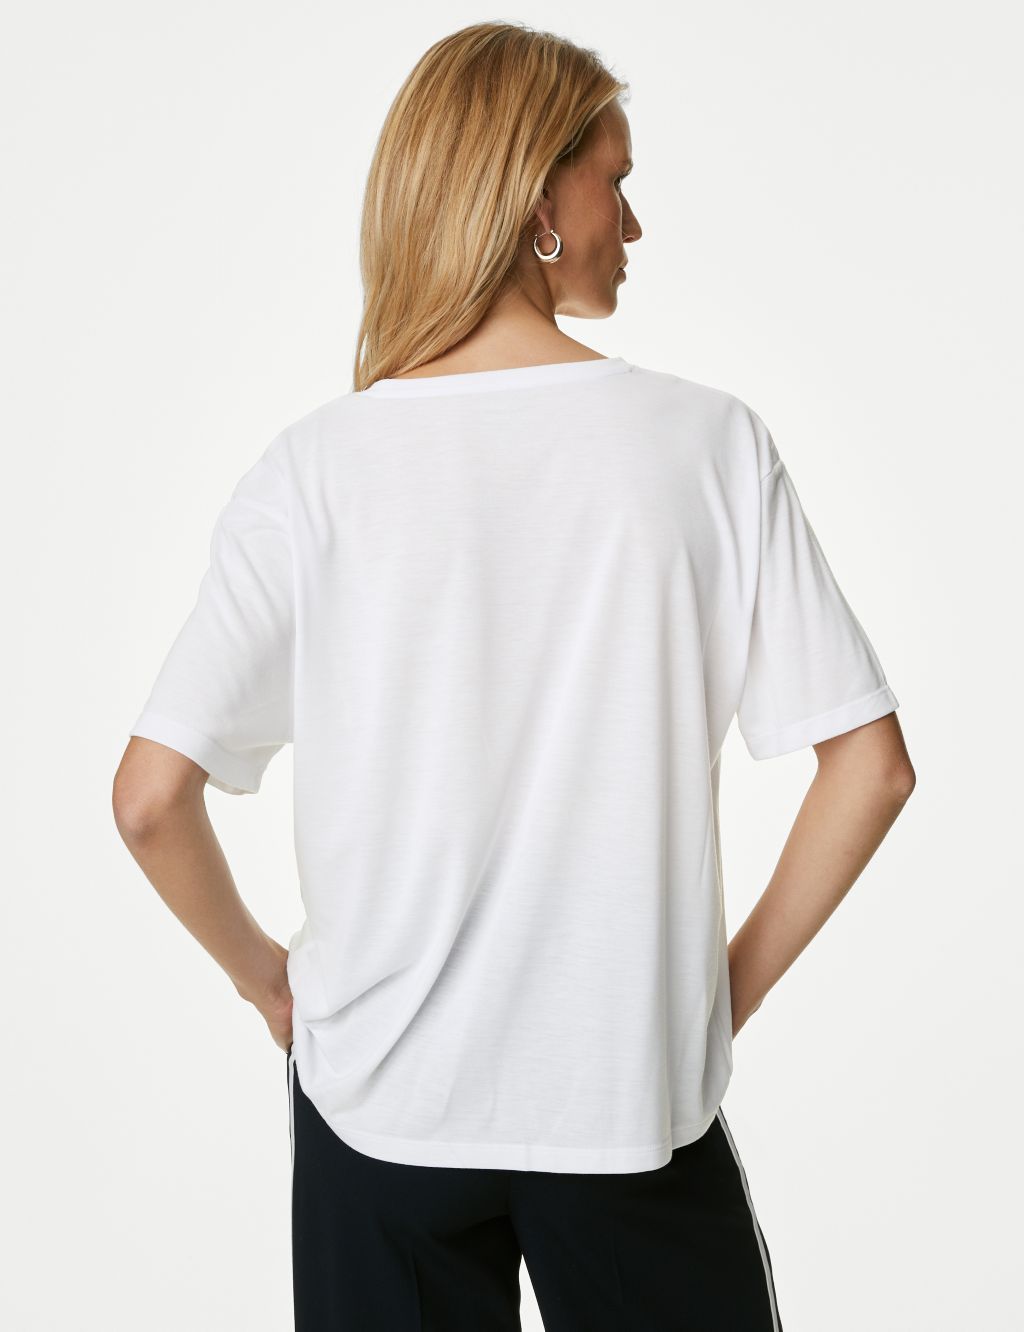 Relaxed Short Sleeve T-Shirt image 5